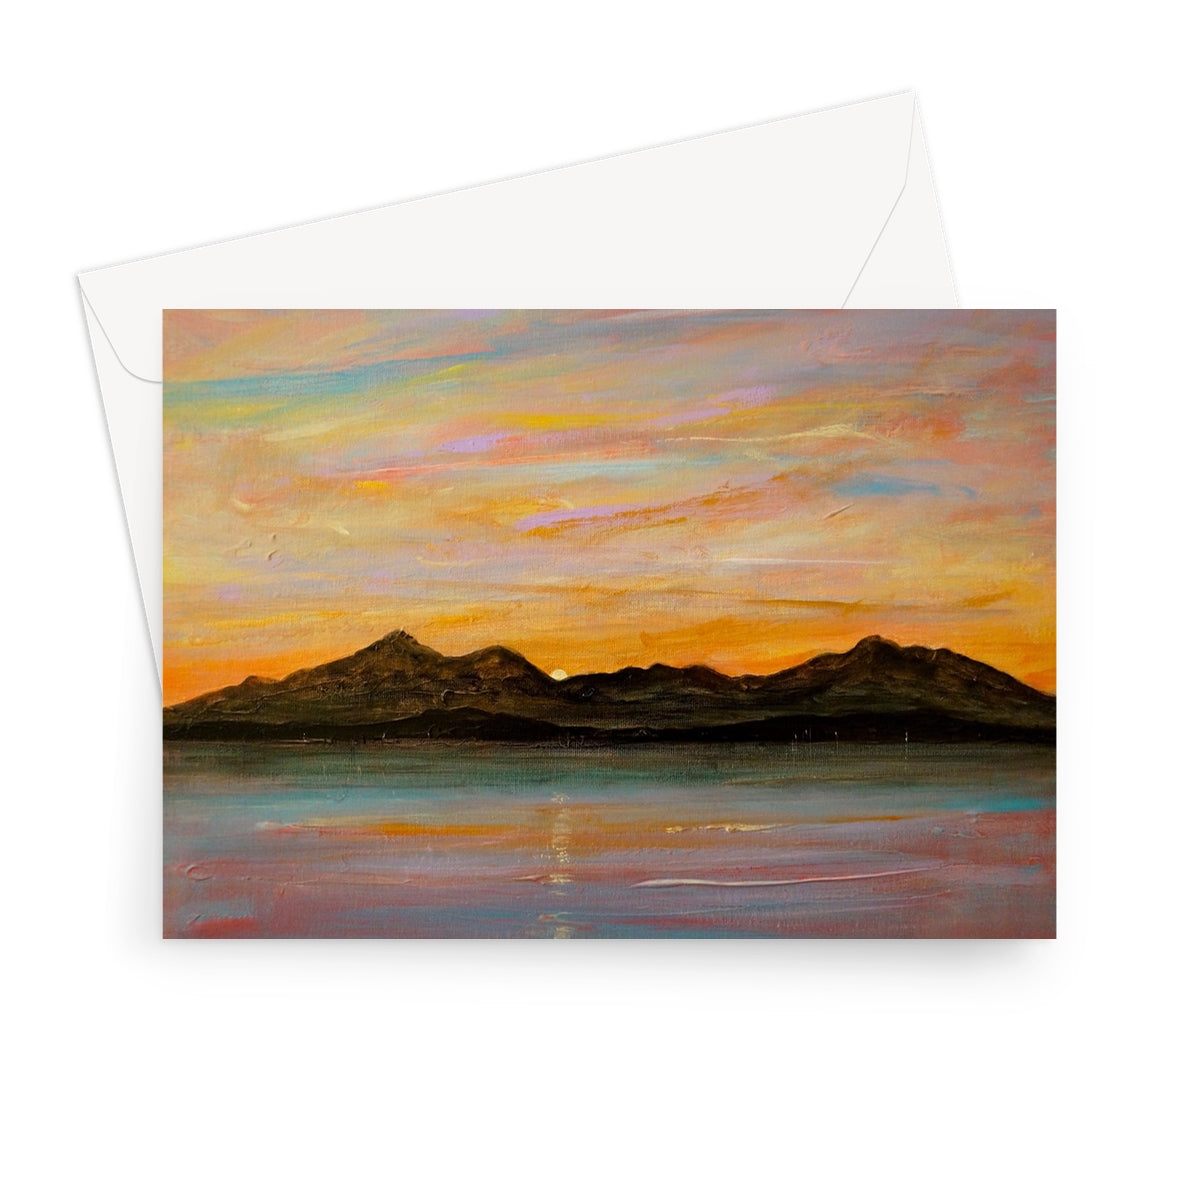 The Sleeping Warrior Arran Art Gifts Greeting Card-Greetings Cards-Arran Art Gallery-7"x5"-10 Cards-Paintings, Prints, Homeware, Art Gifts From Scotland By Scottish Artist Kevin Hunter